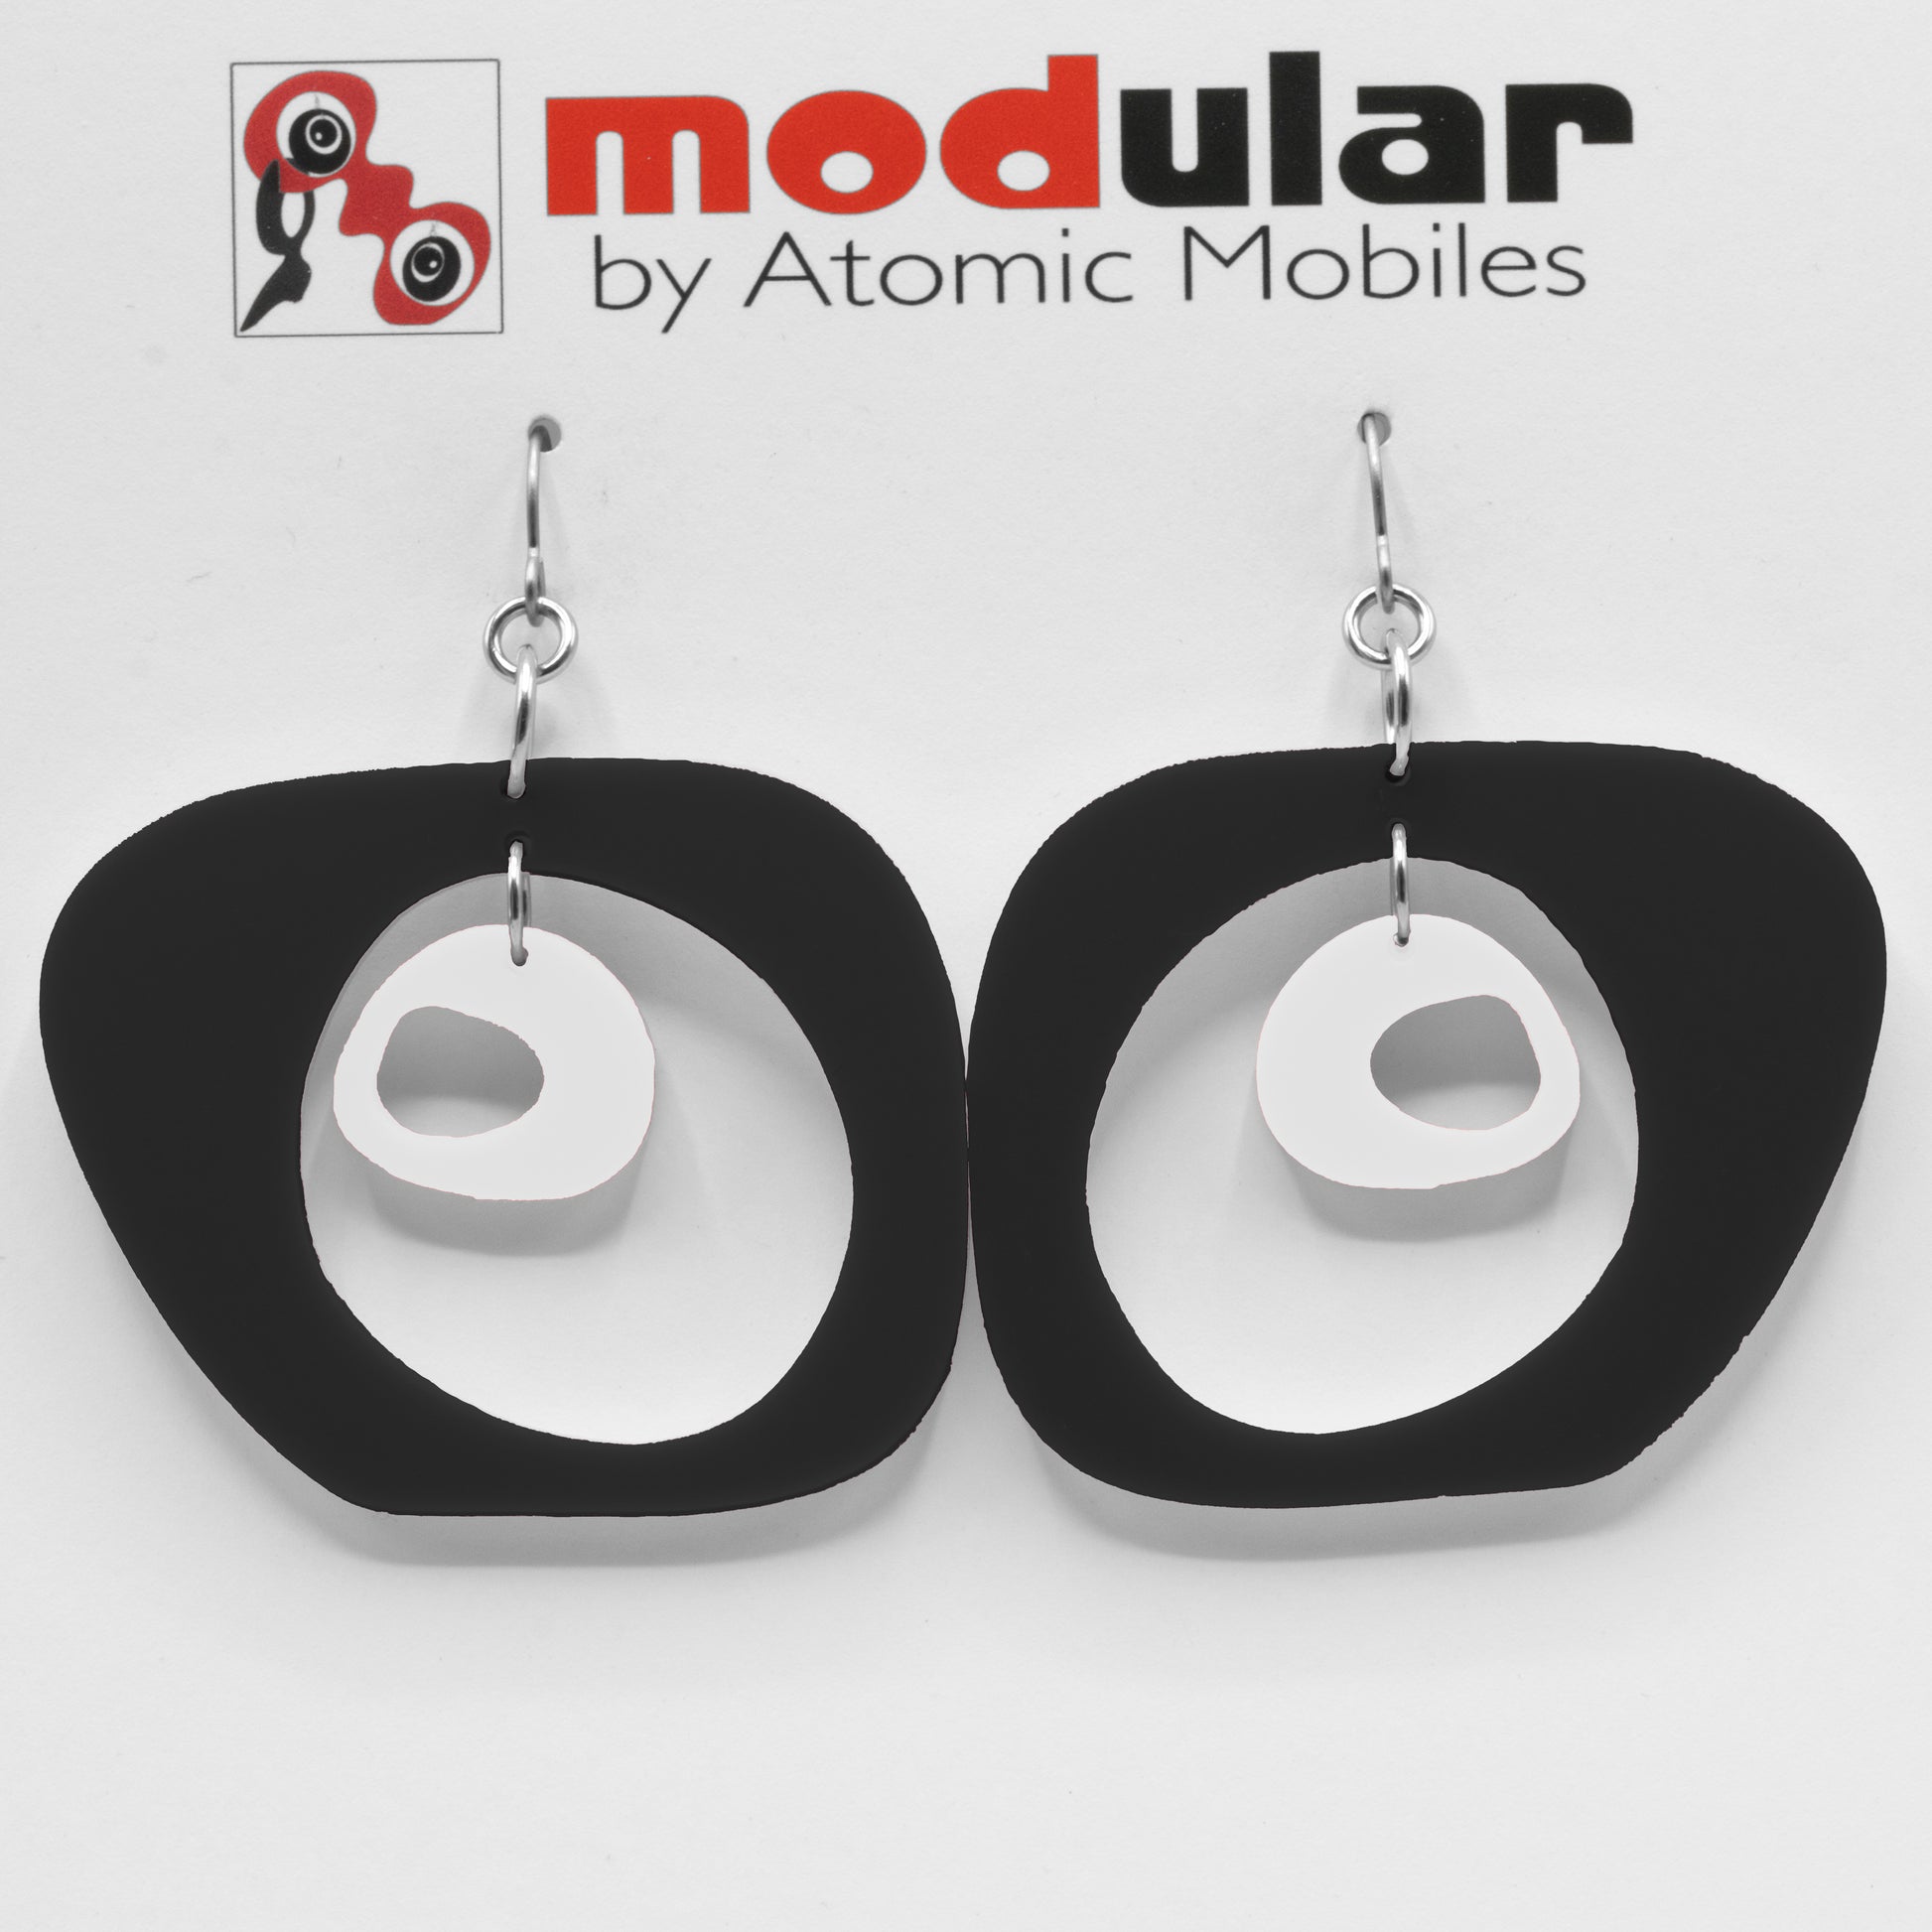 MODular Earrings - Paris Statement Earrings in Black and White by AtomicMobiles.com - retro era inspired mod handmade jewelry